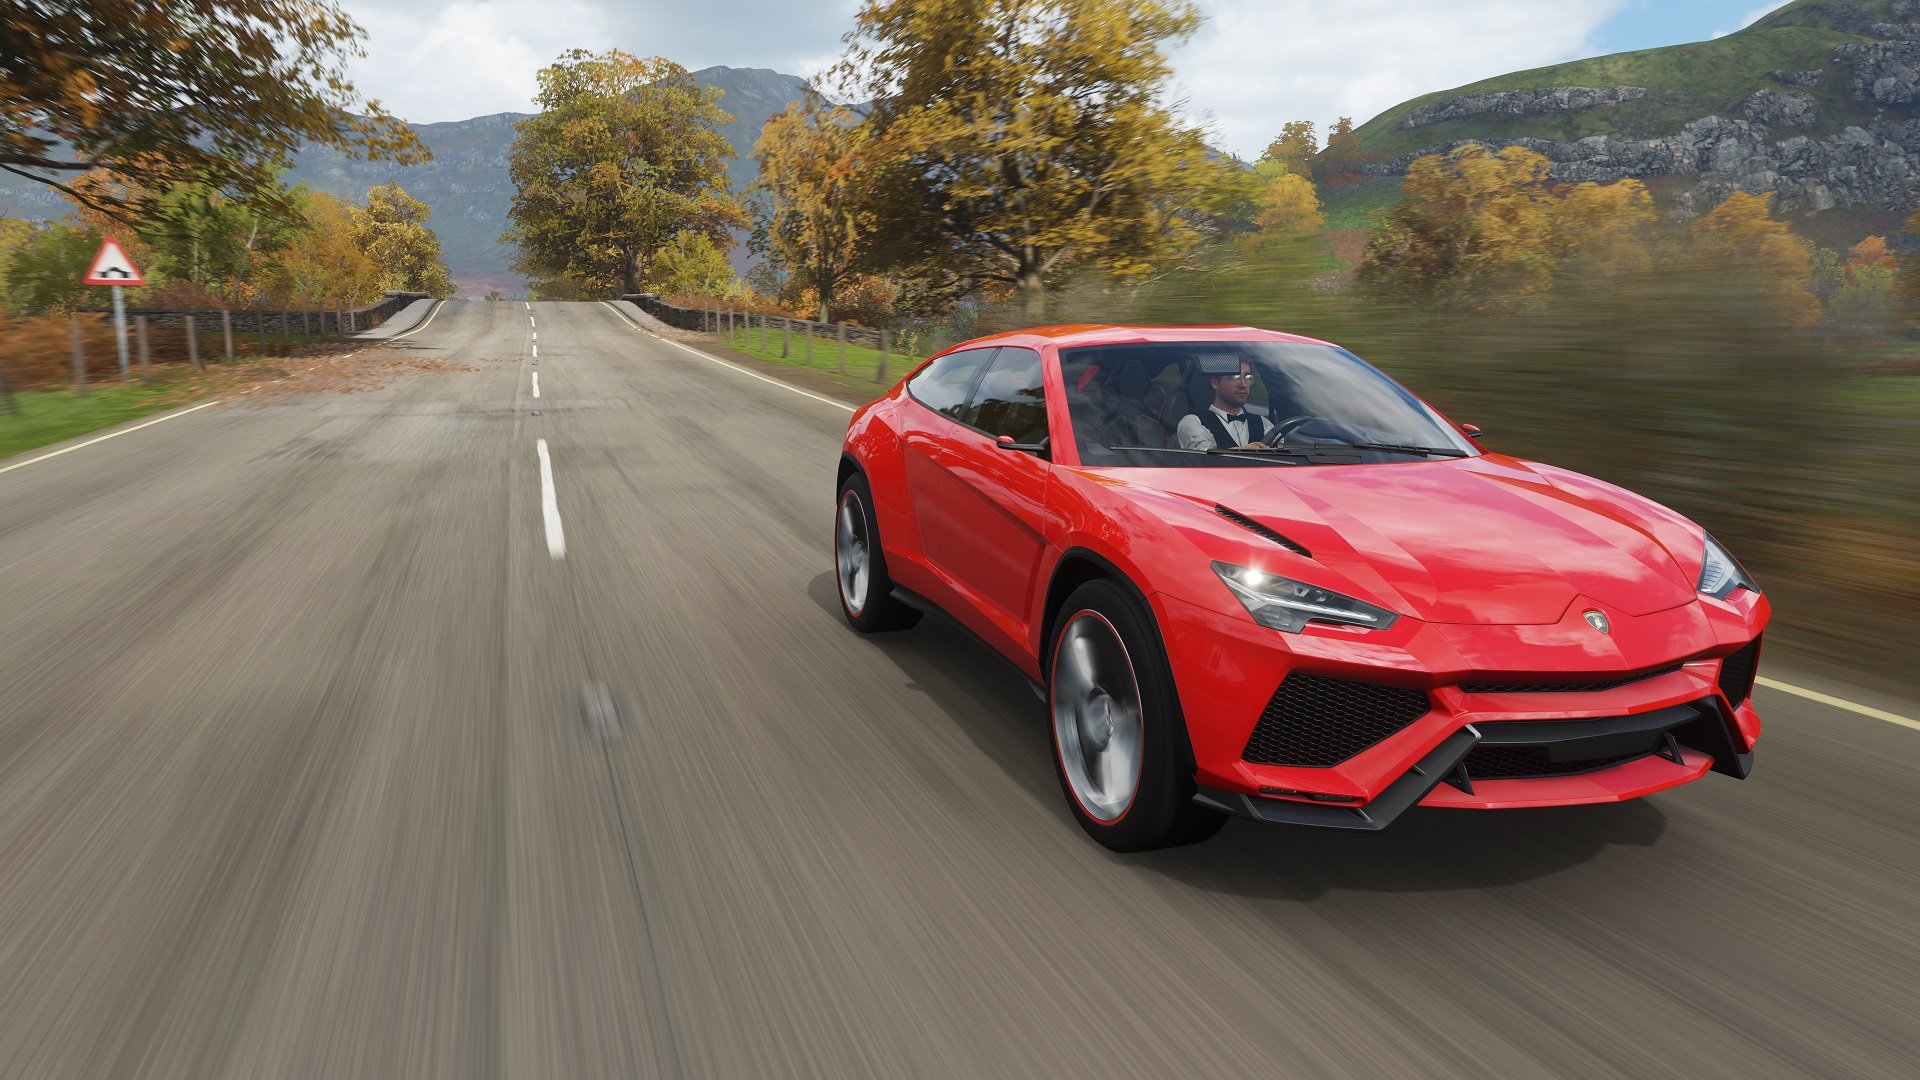 An optimized version of Forza Horizon 4 running on Xbox Series X